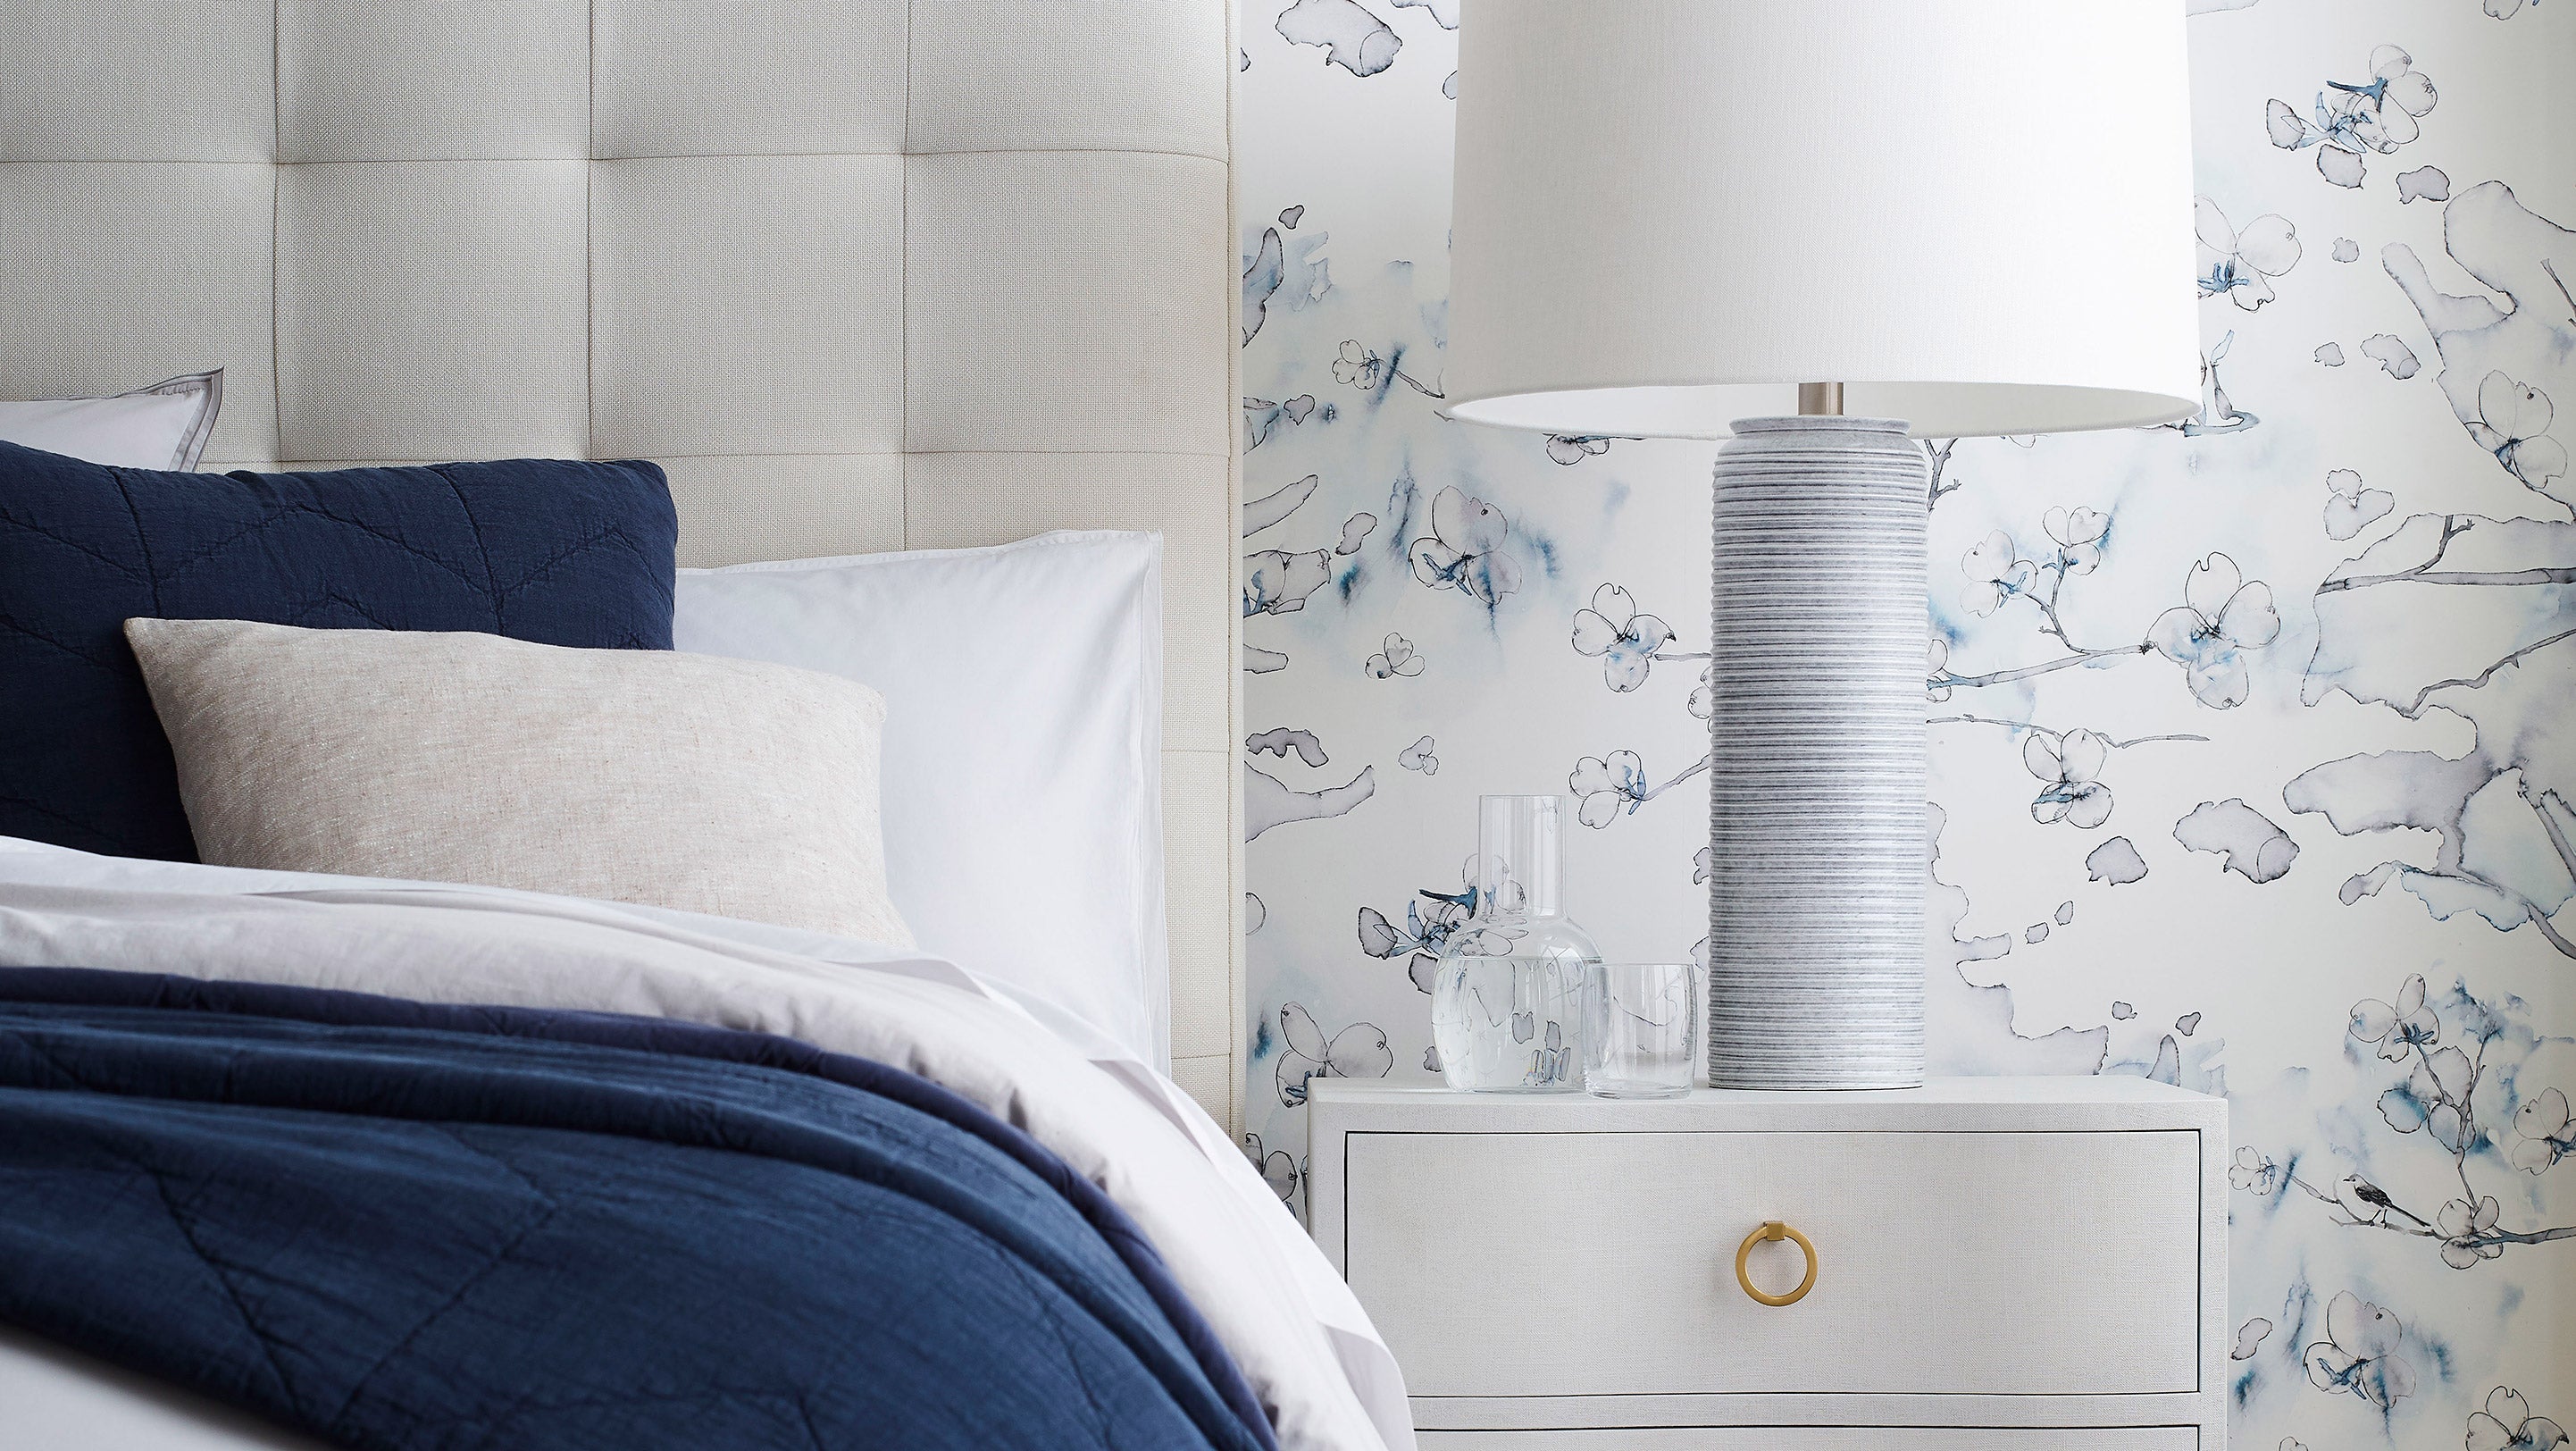 Dogwood dreams Wallpaper in indigo with its navy blue and slight pink accents is installed in a bedroom.